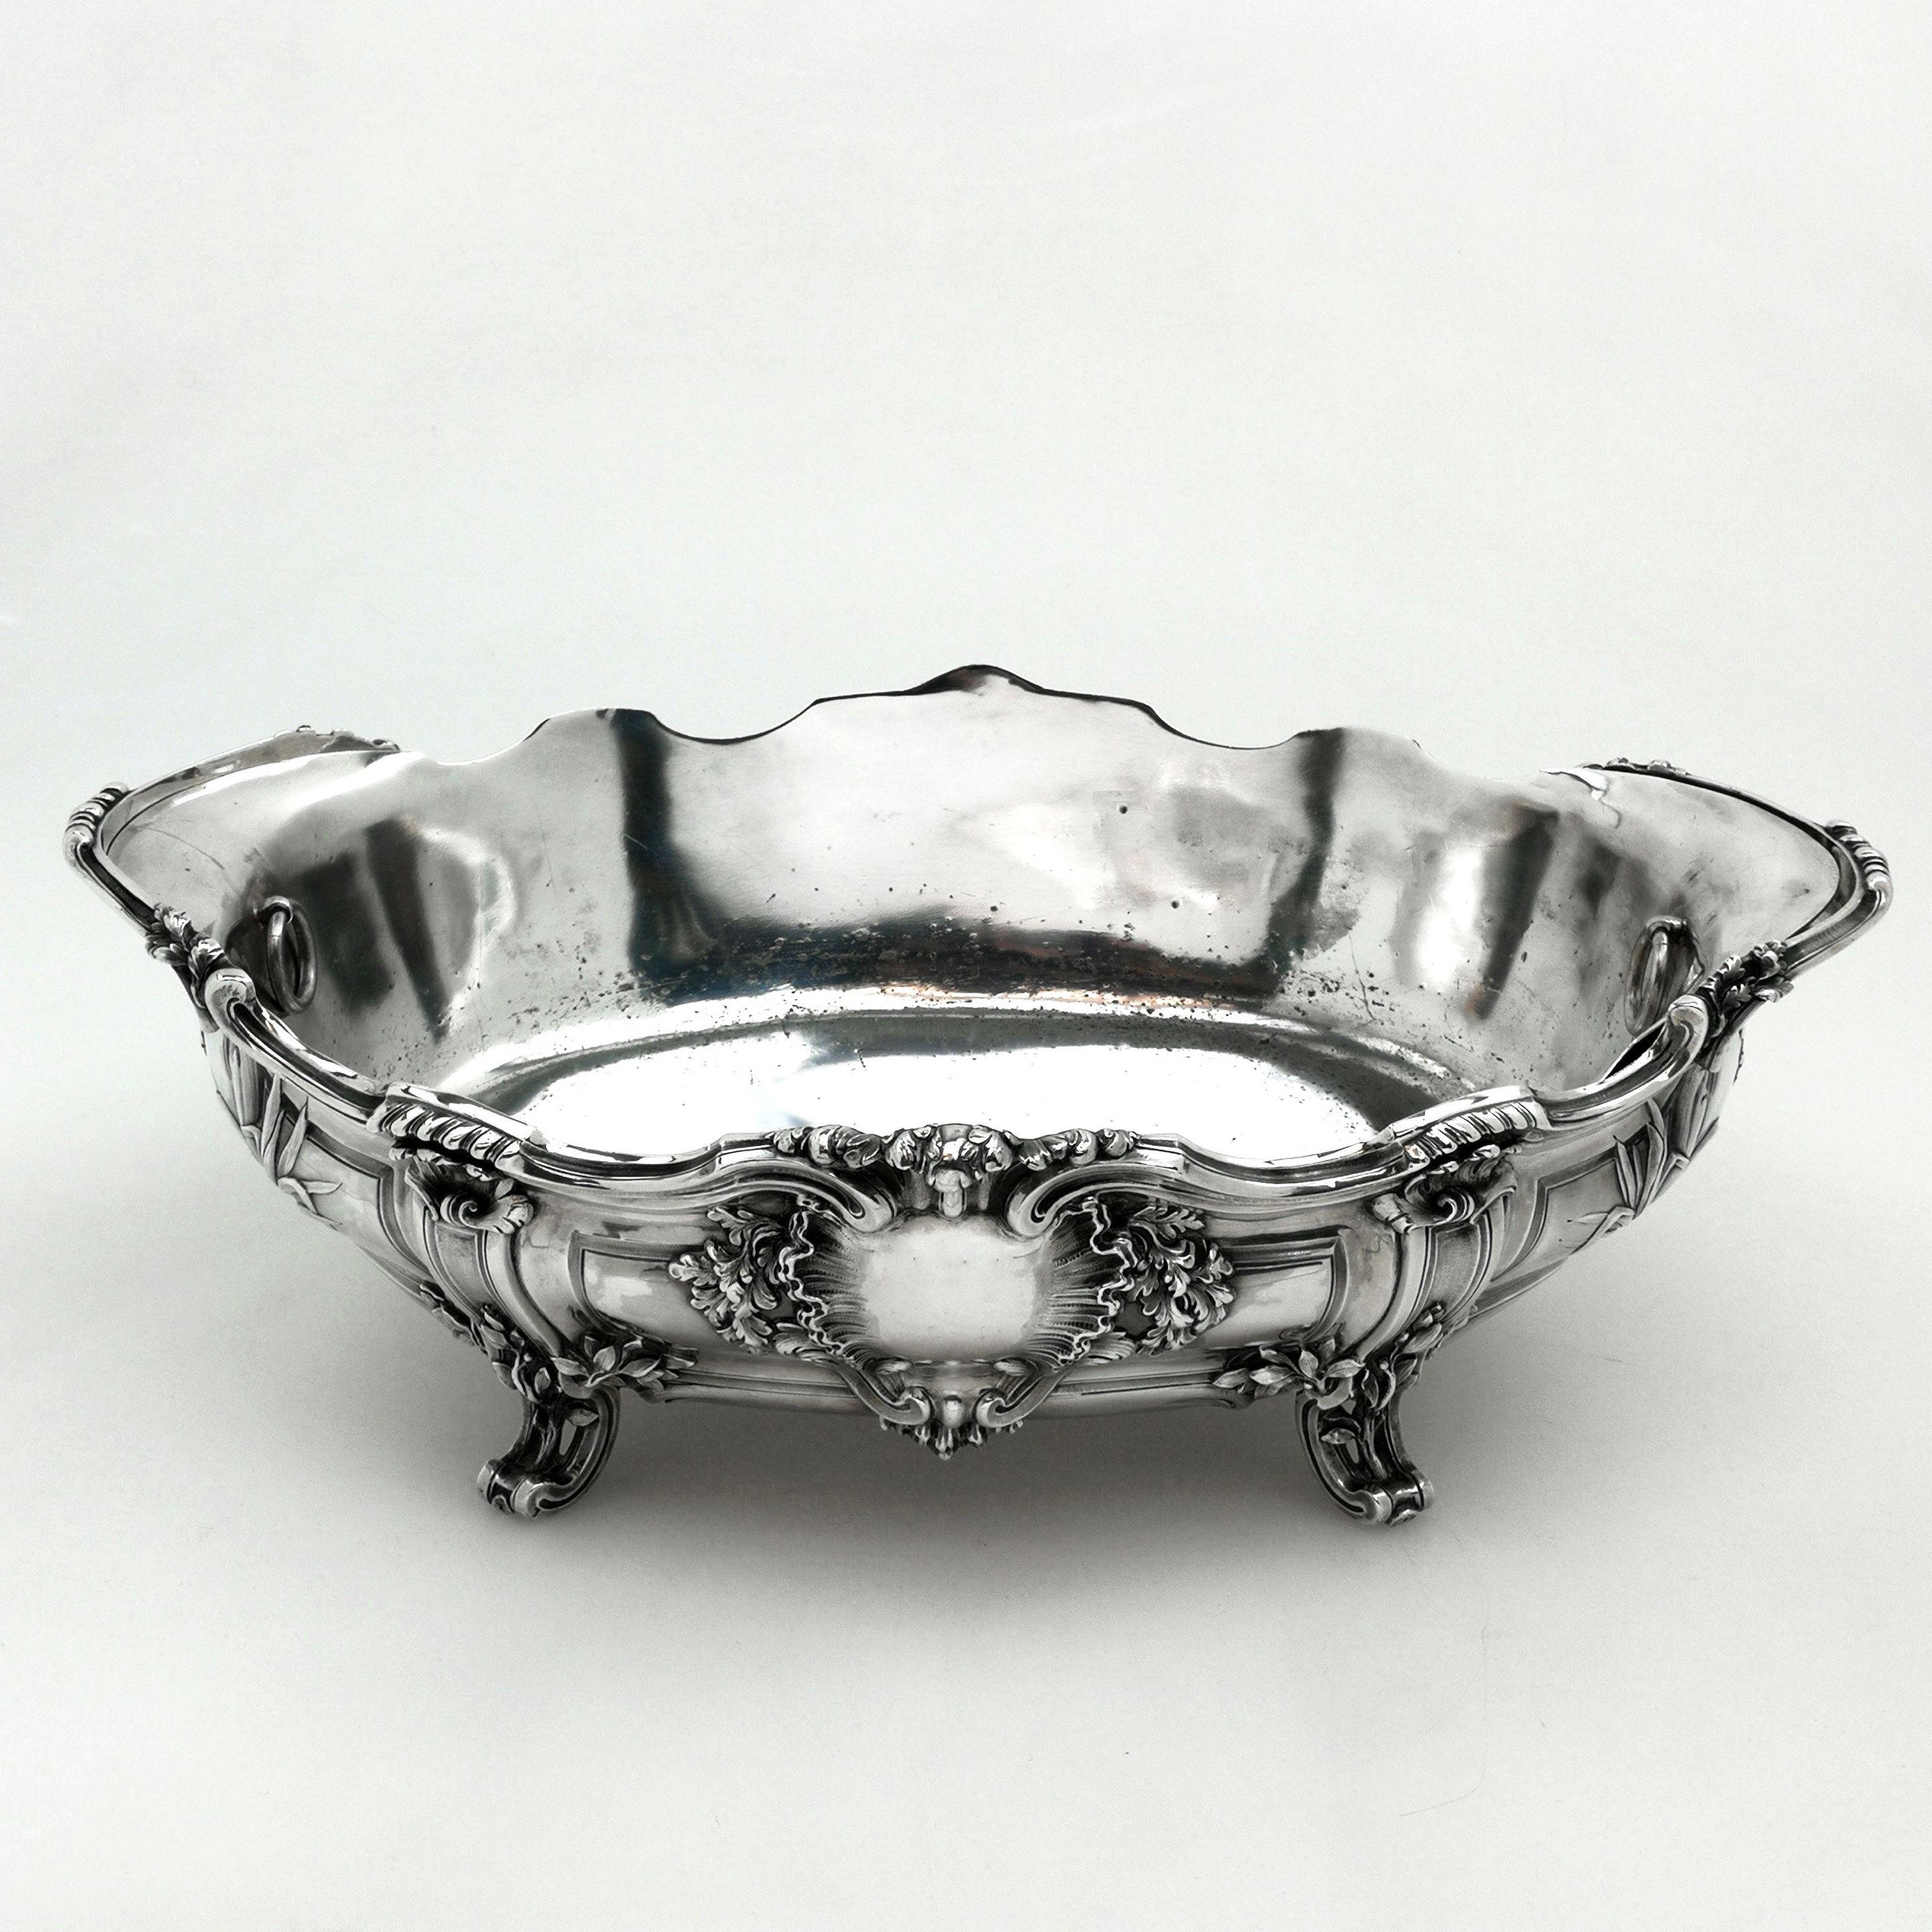 A magnificent Antique French Silver Jardiniere standing with a substantial oval shape and decorated with an impressive chased & applied floral designs. The Centrepiece Dish stands on four ornate feel. The Jardiniere has a removable silver plated